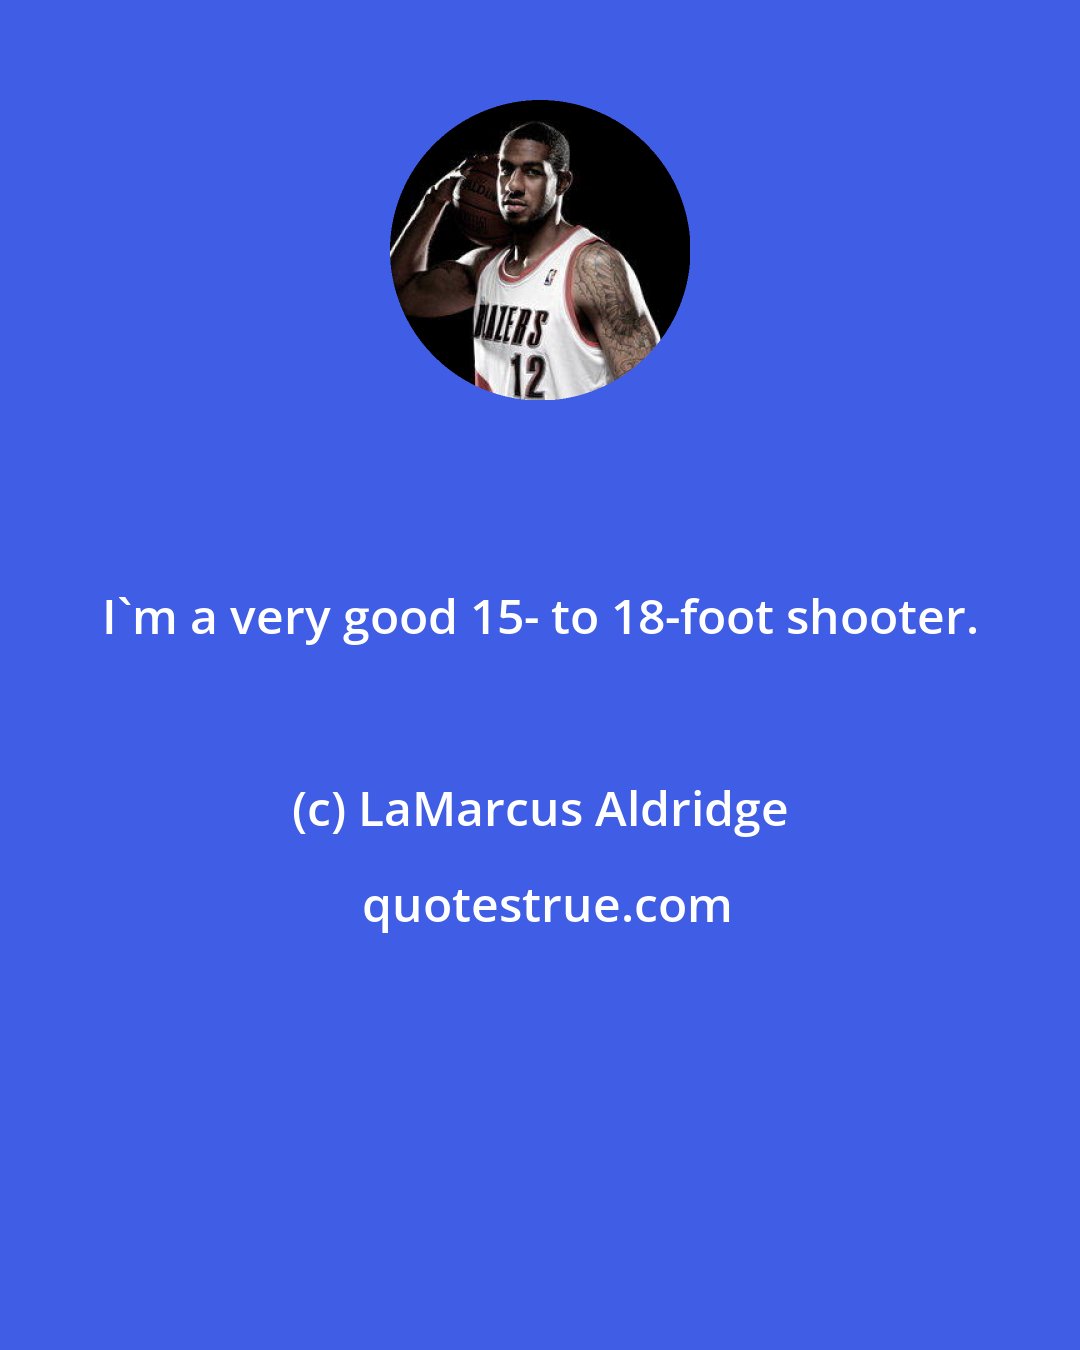 LaMarcus Aldridge: I'm a very good 15- to 18-foot shooter.